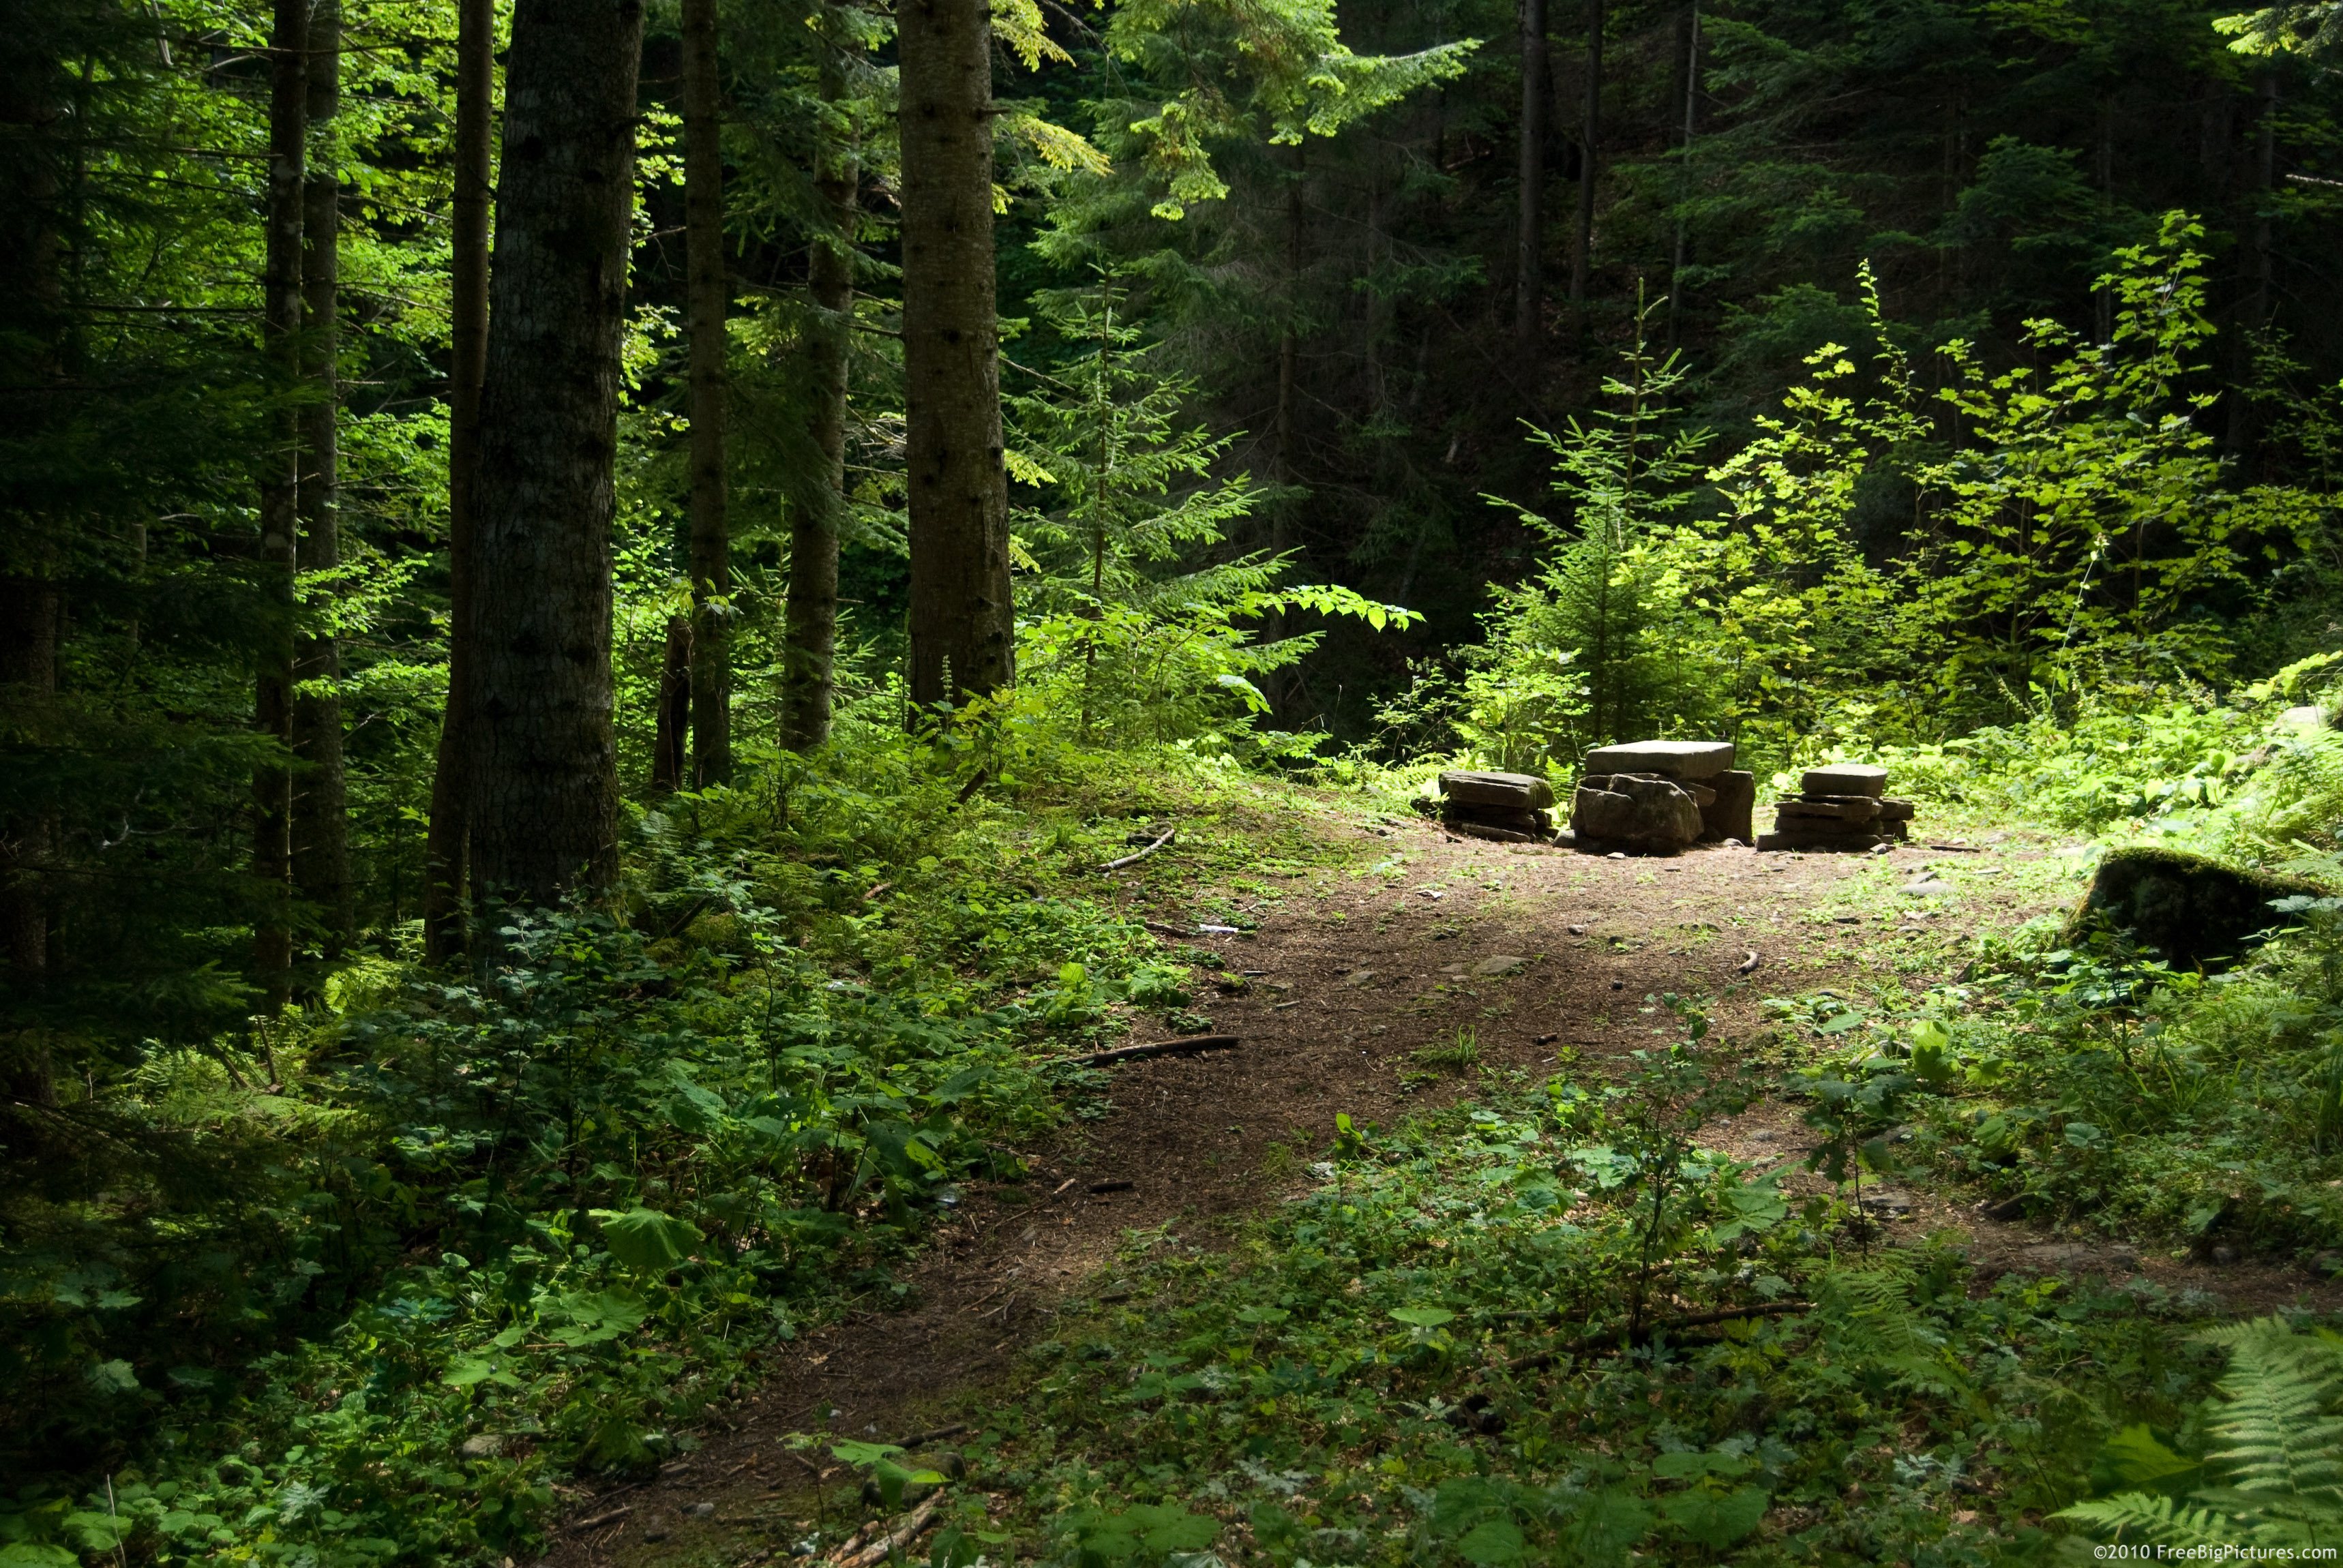 a small clearing in an otherwise dense forest. it is thick with vibrant green vegetation save for a dirt path leading to a pile of stones, lit from above by an usceen midday sun